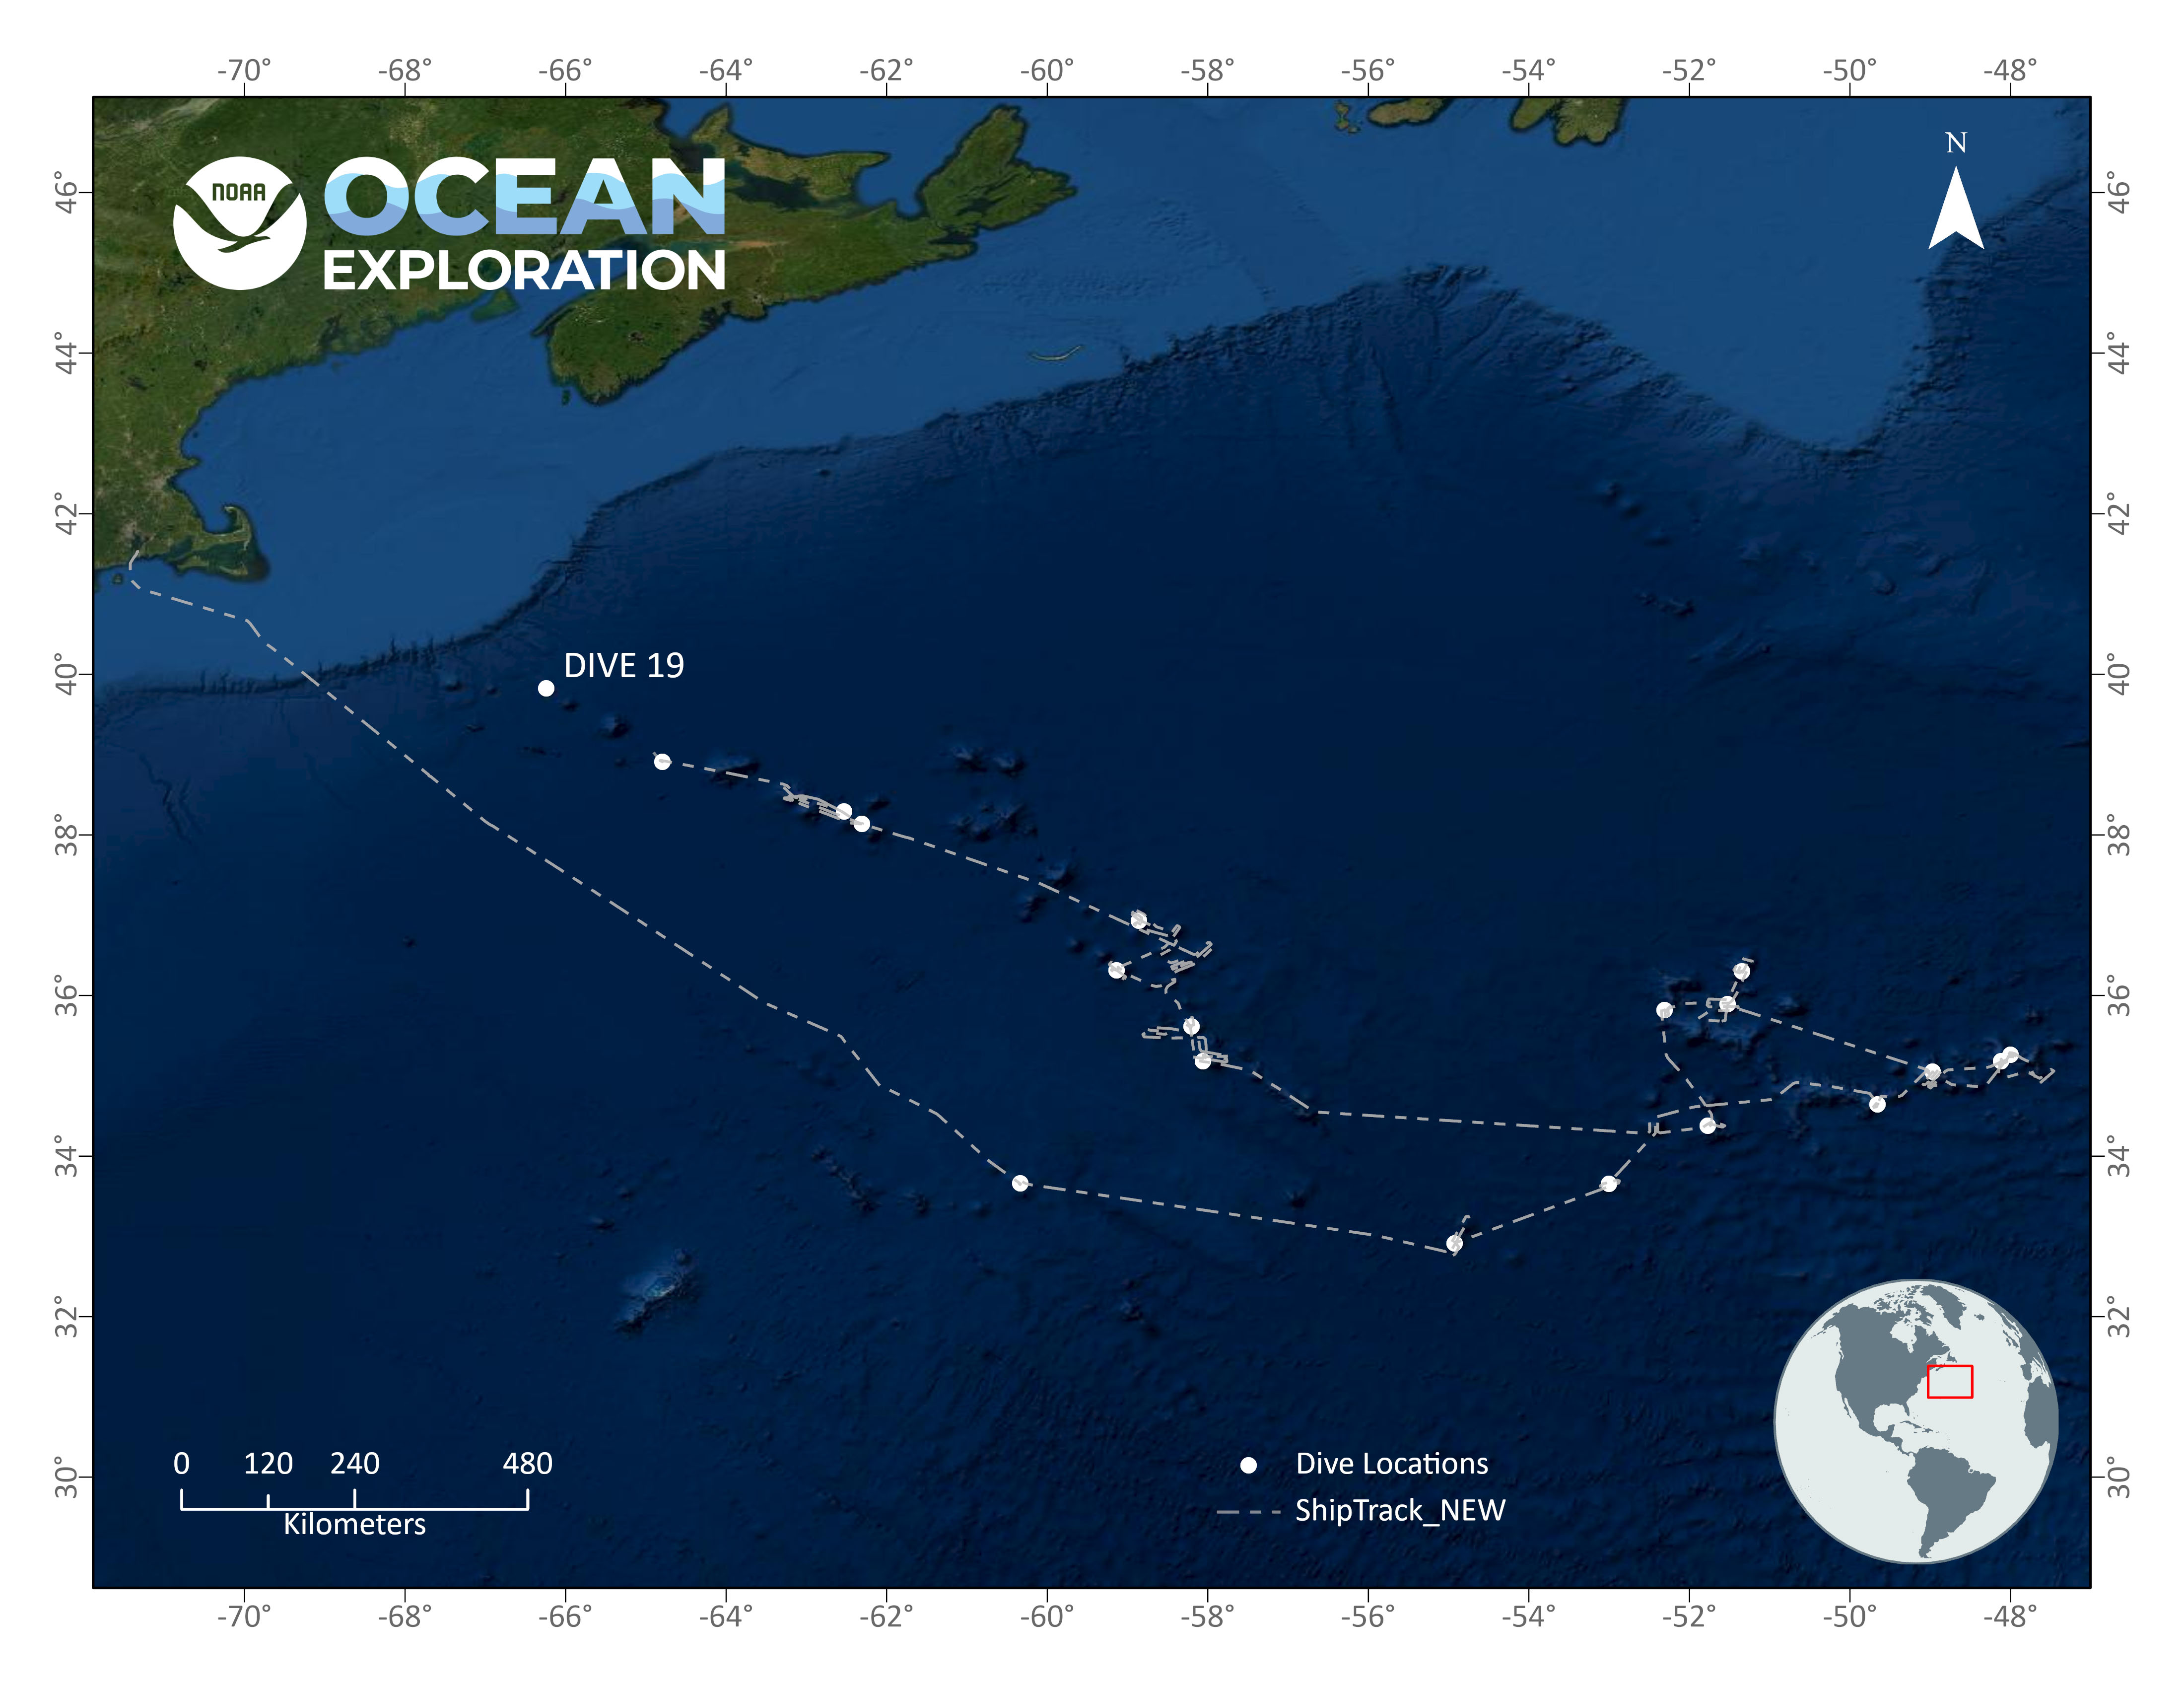 Location of Dive 19 of the 2021 North Atlantic Stepping Stones expedition on July 27, 2021.